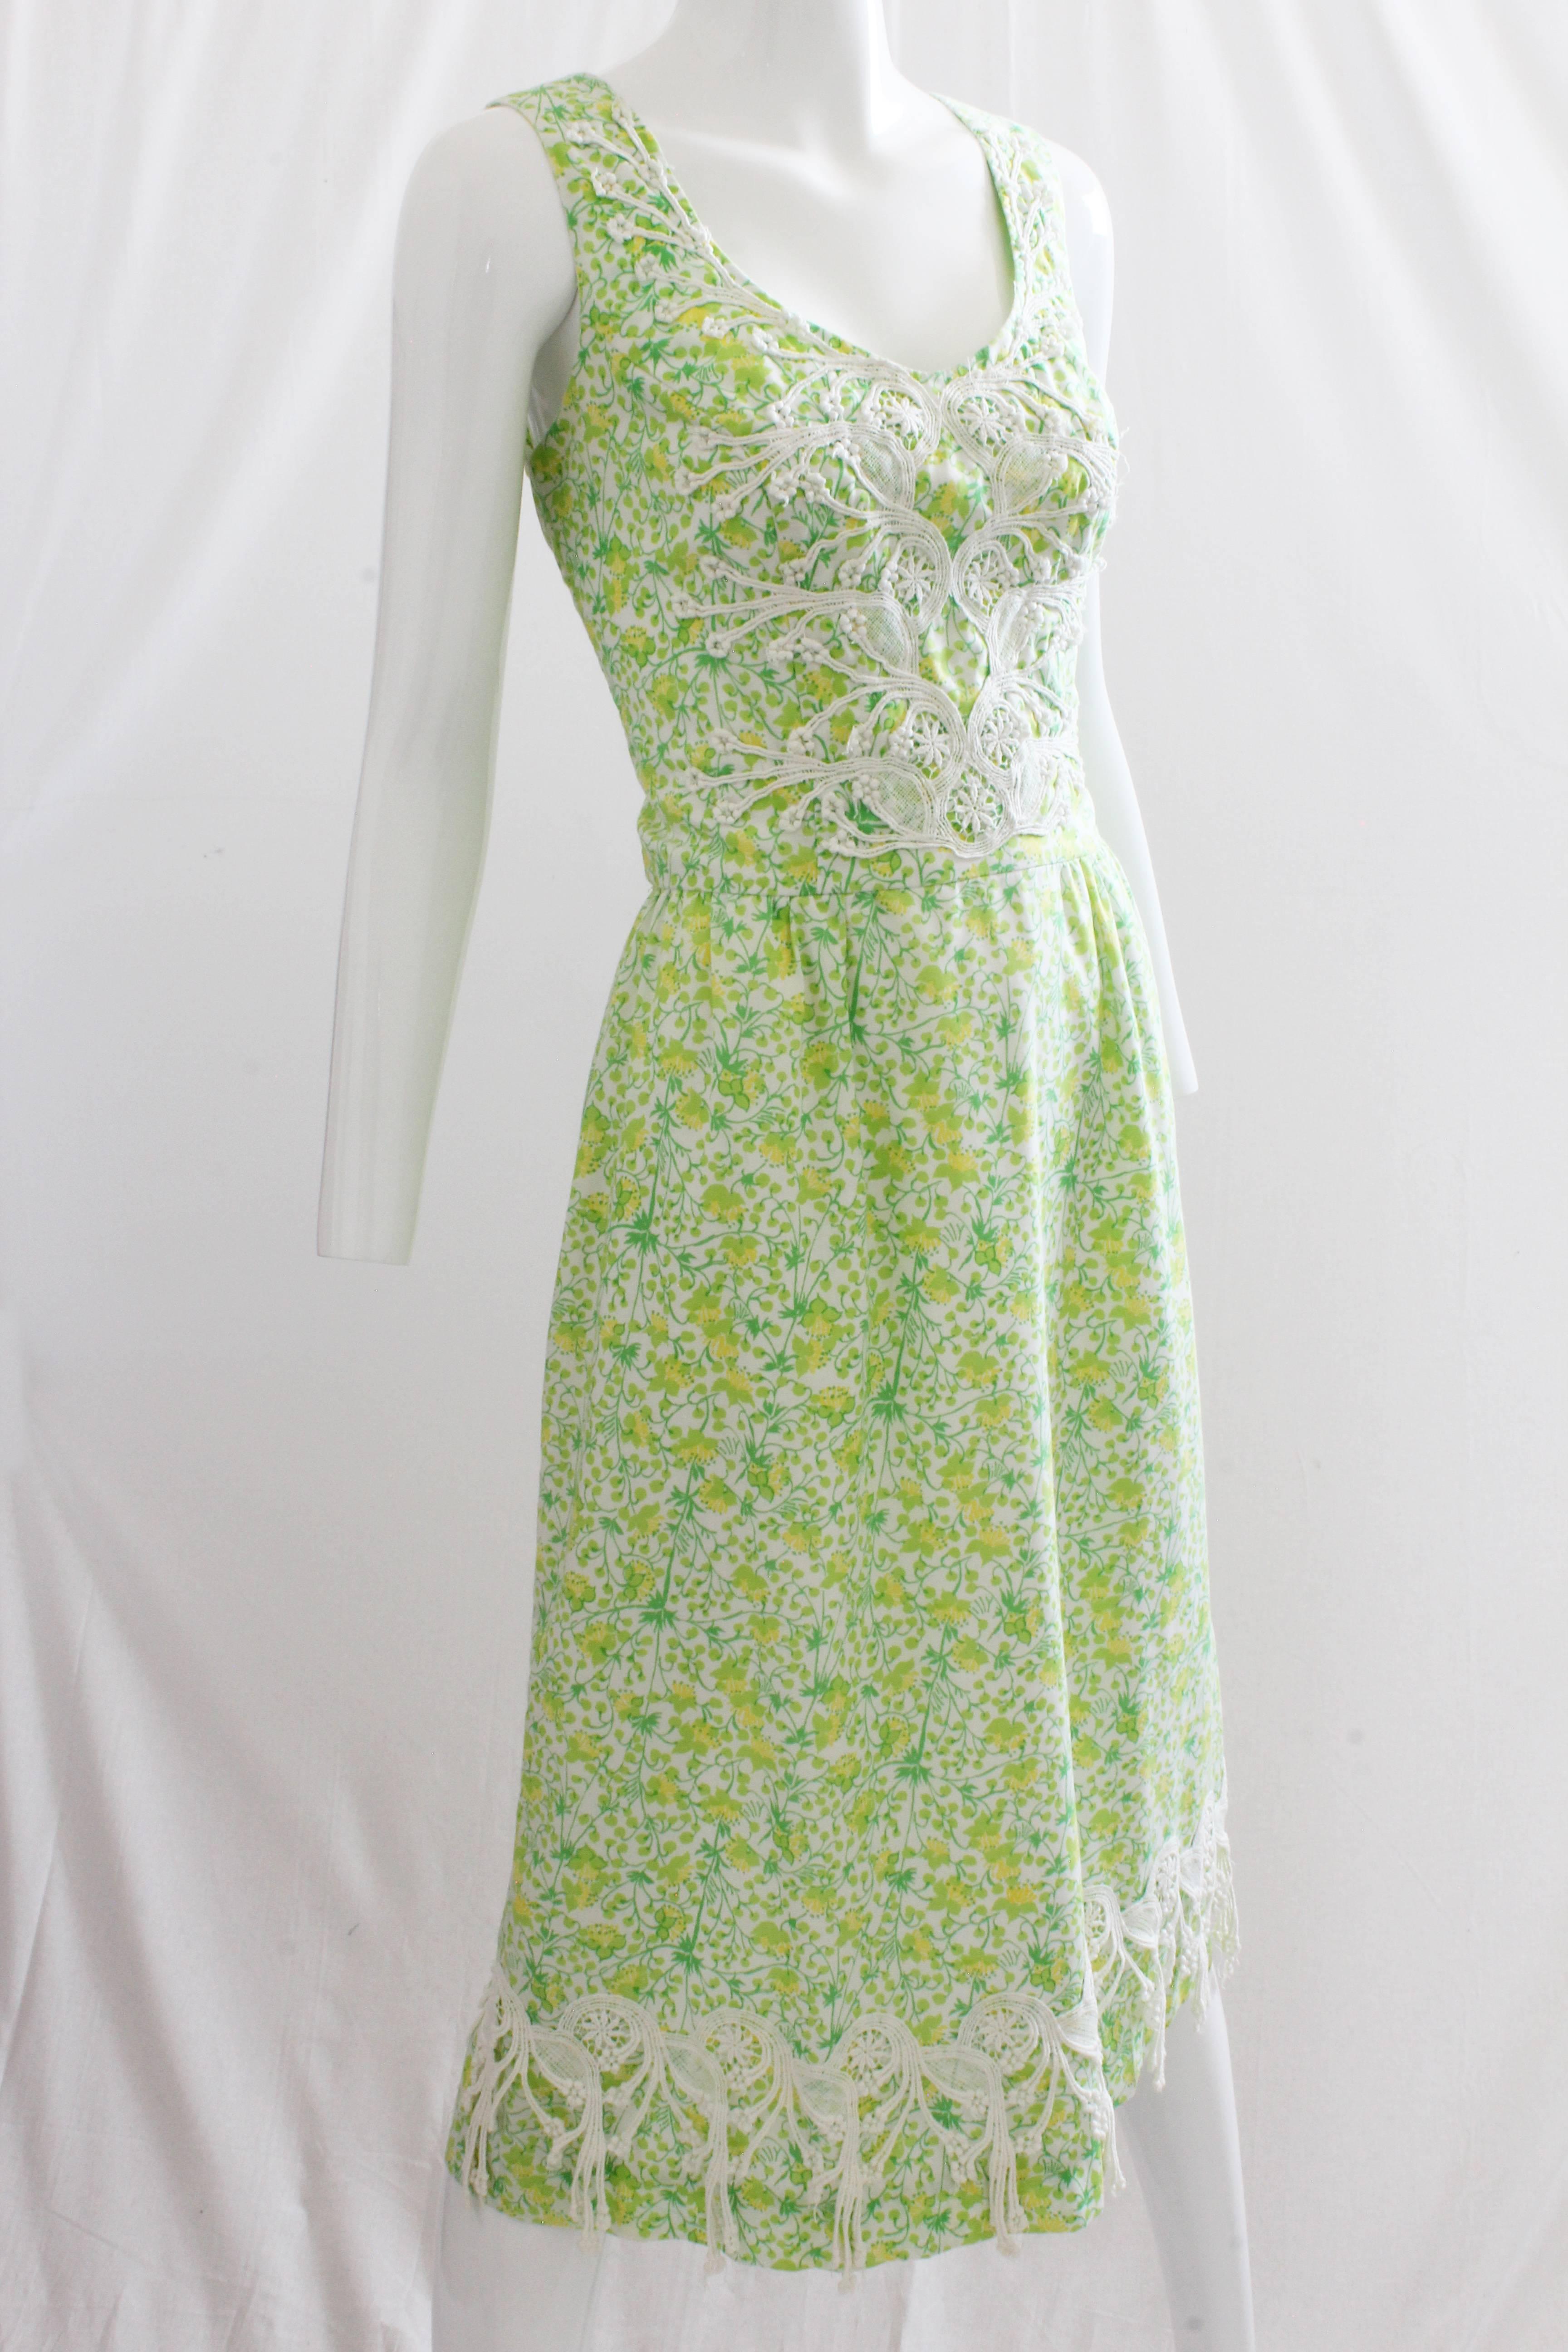 Beige 1970s Lilly Pulitzer Floral Print Dress with Lace Detailing Size 8/10